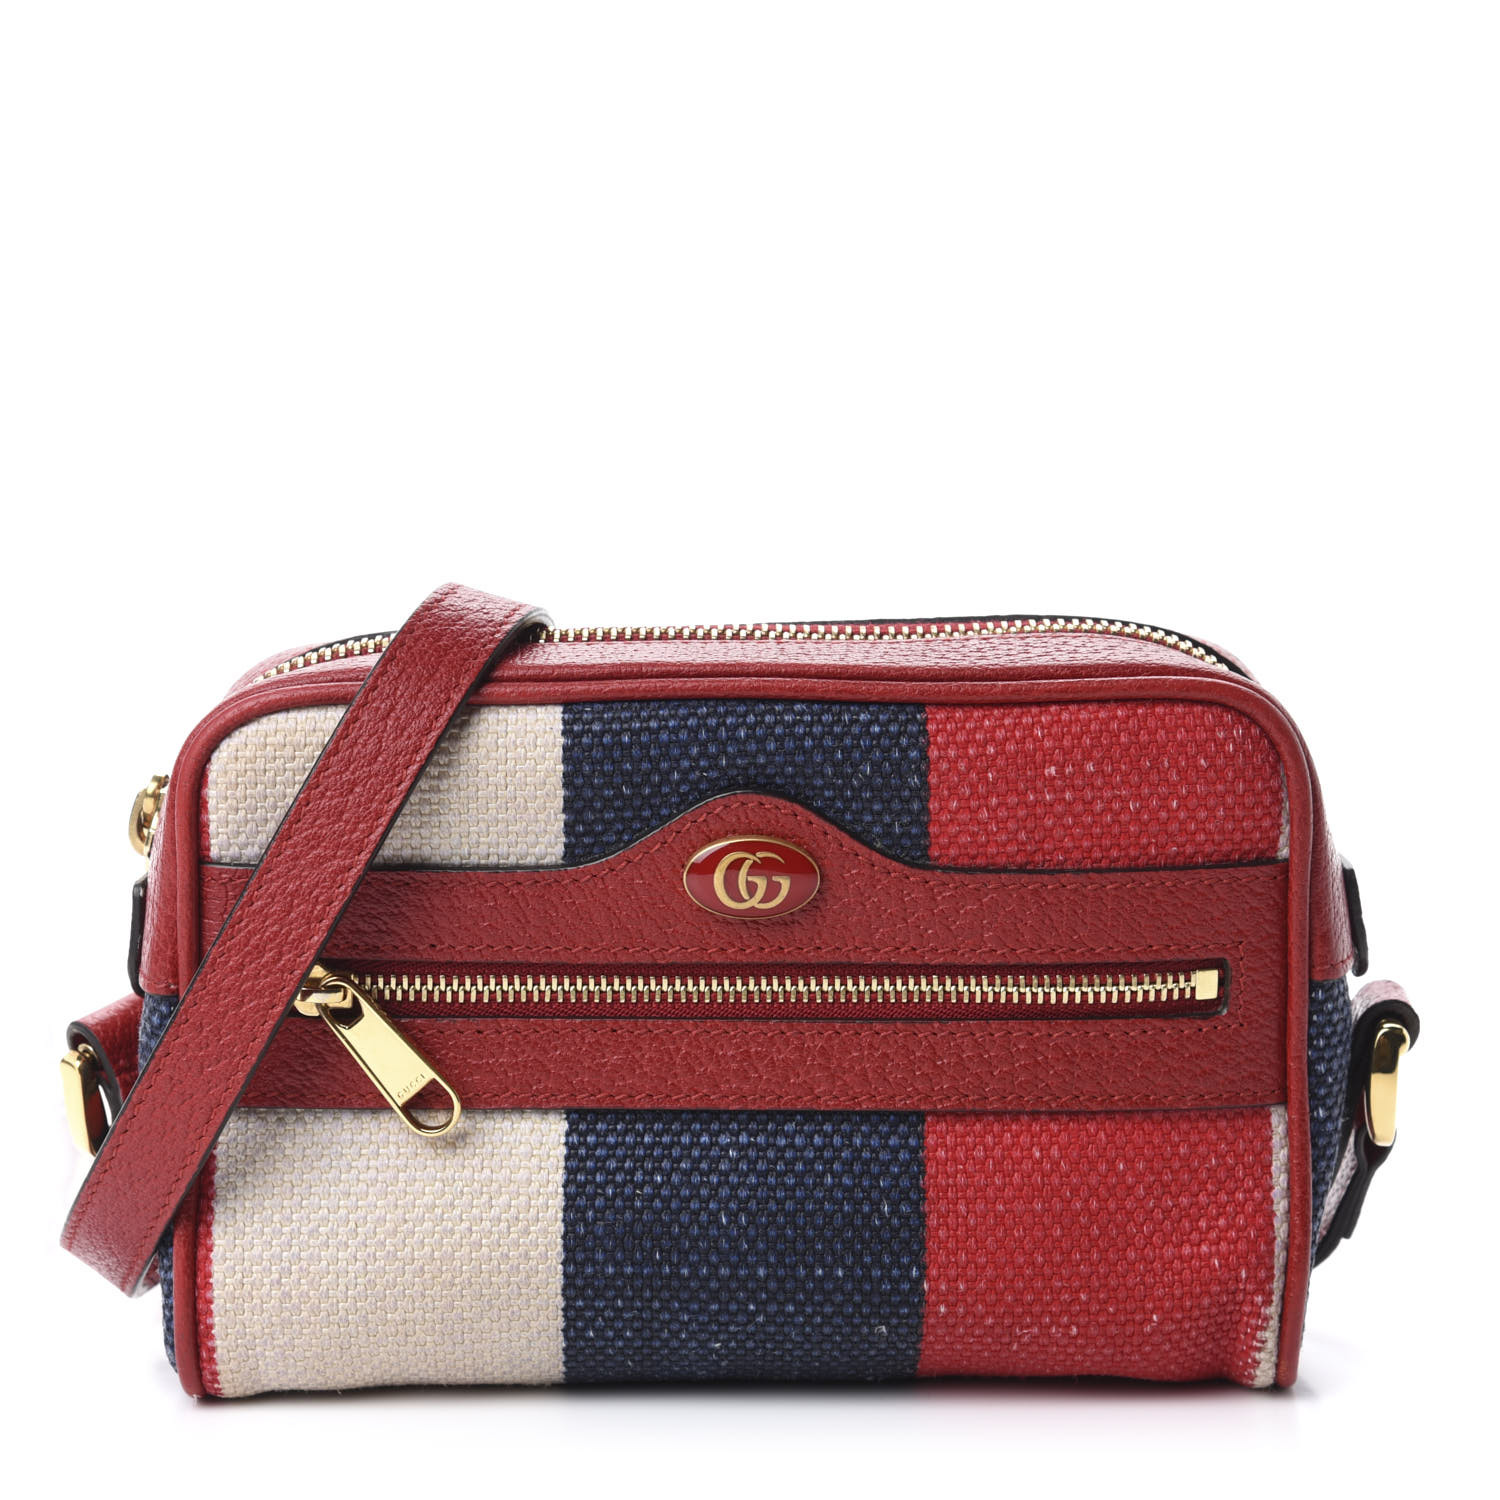 gucci bag red white and blue